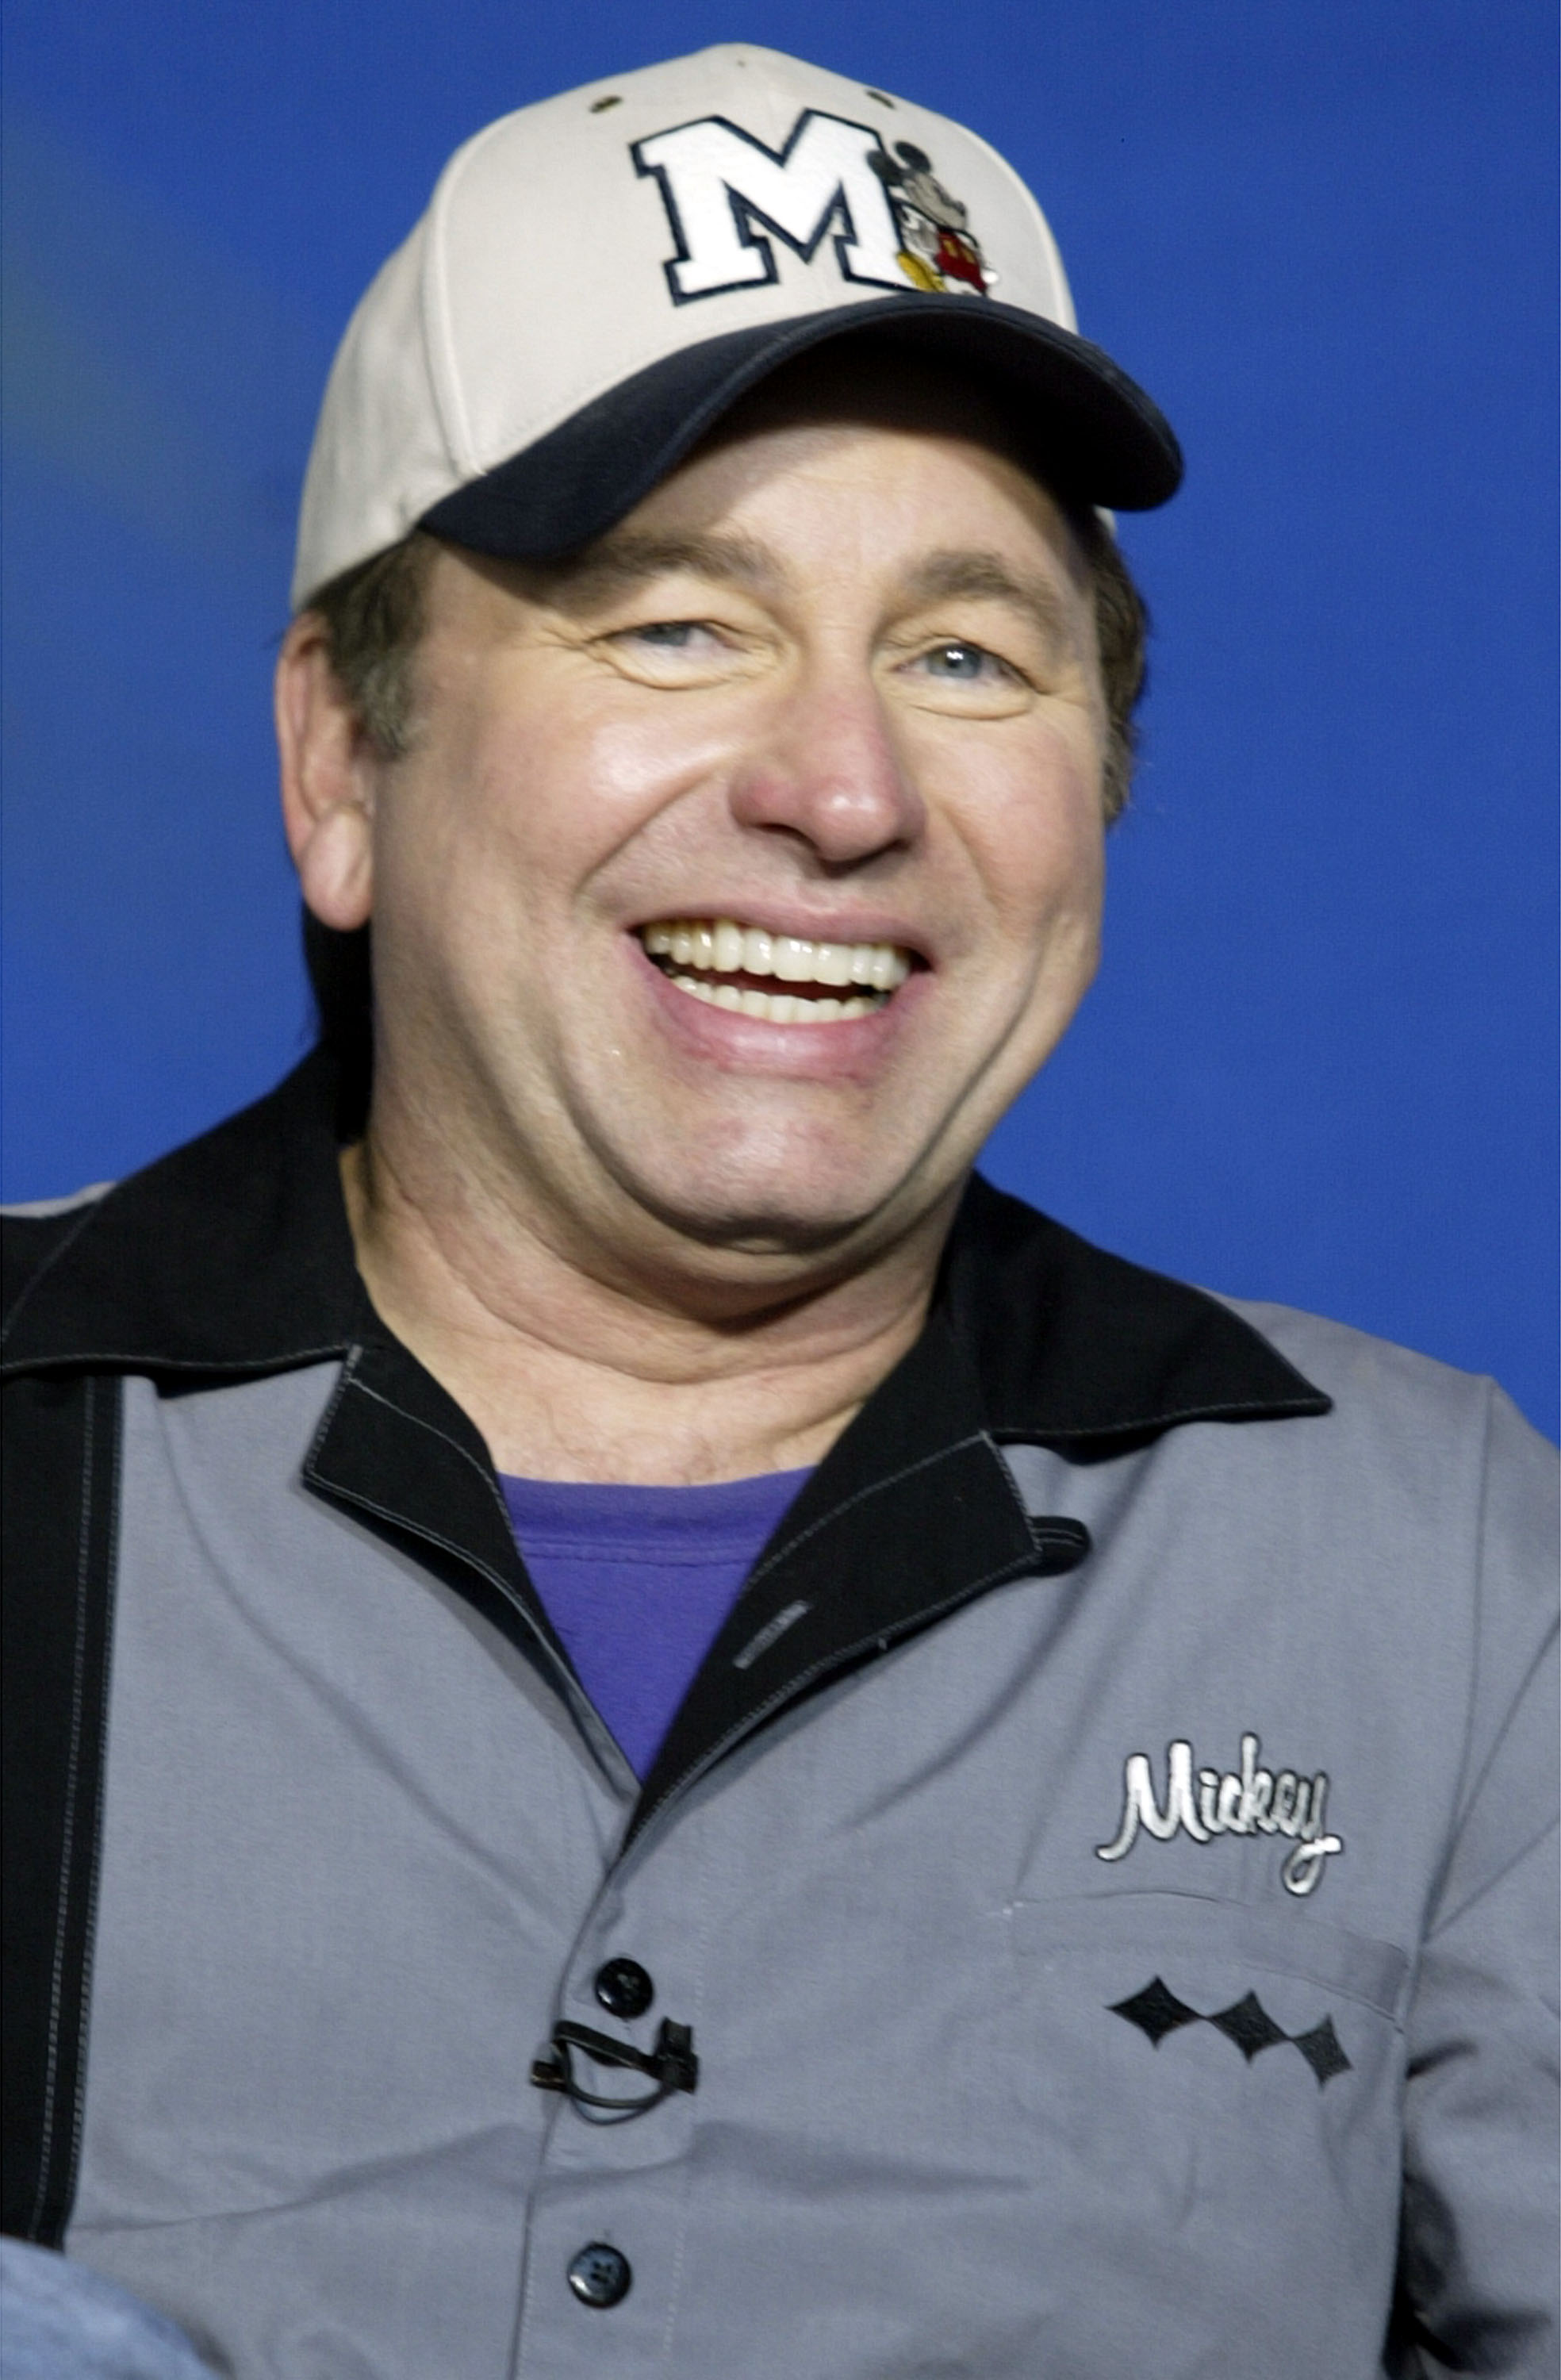 John Ritter at Disney's California Adventure in Anaheim, California on September 7, 2003.  | Source: Getty Images